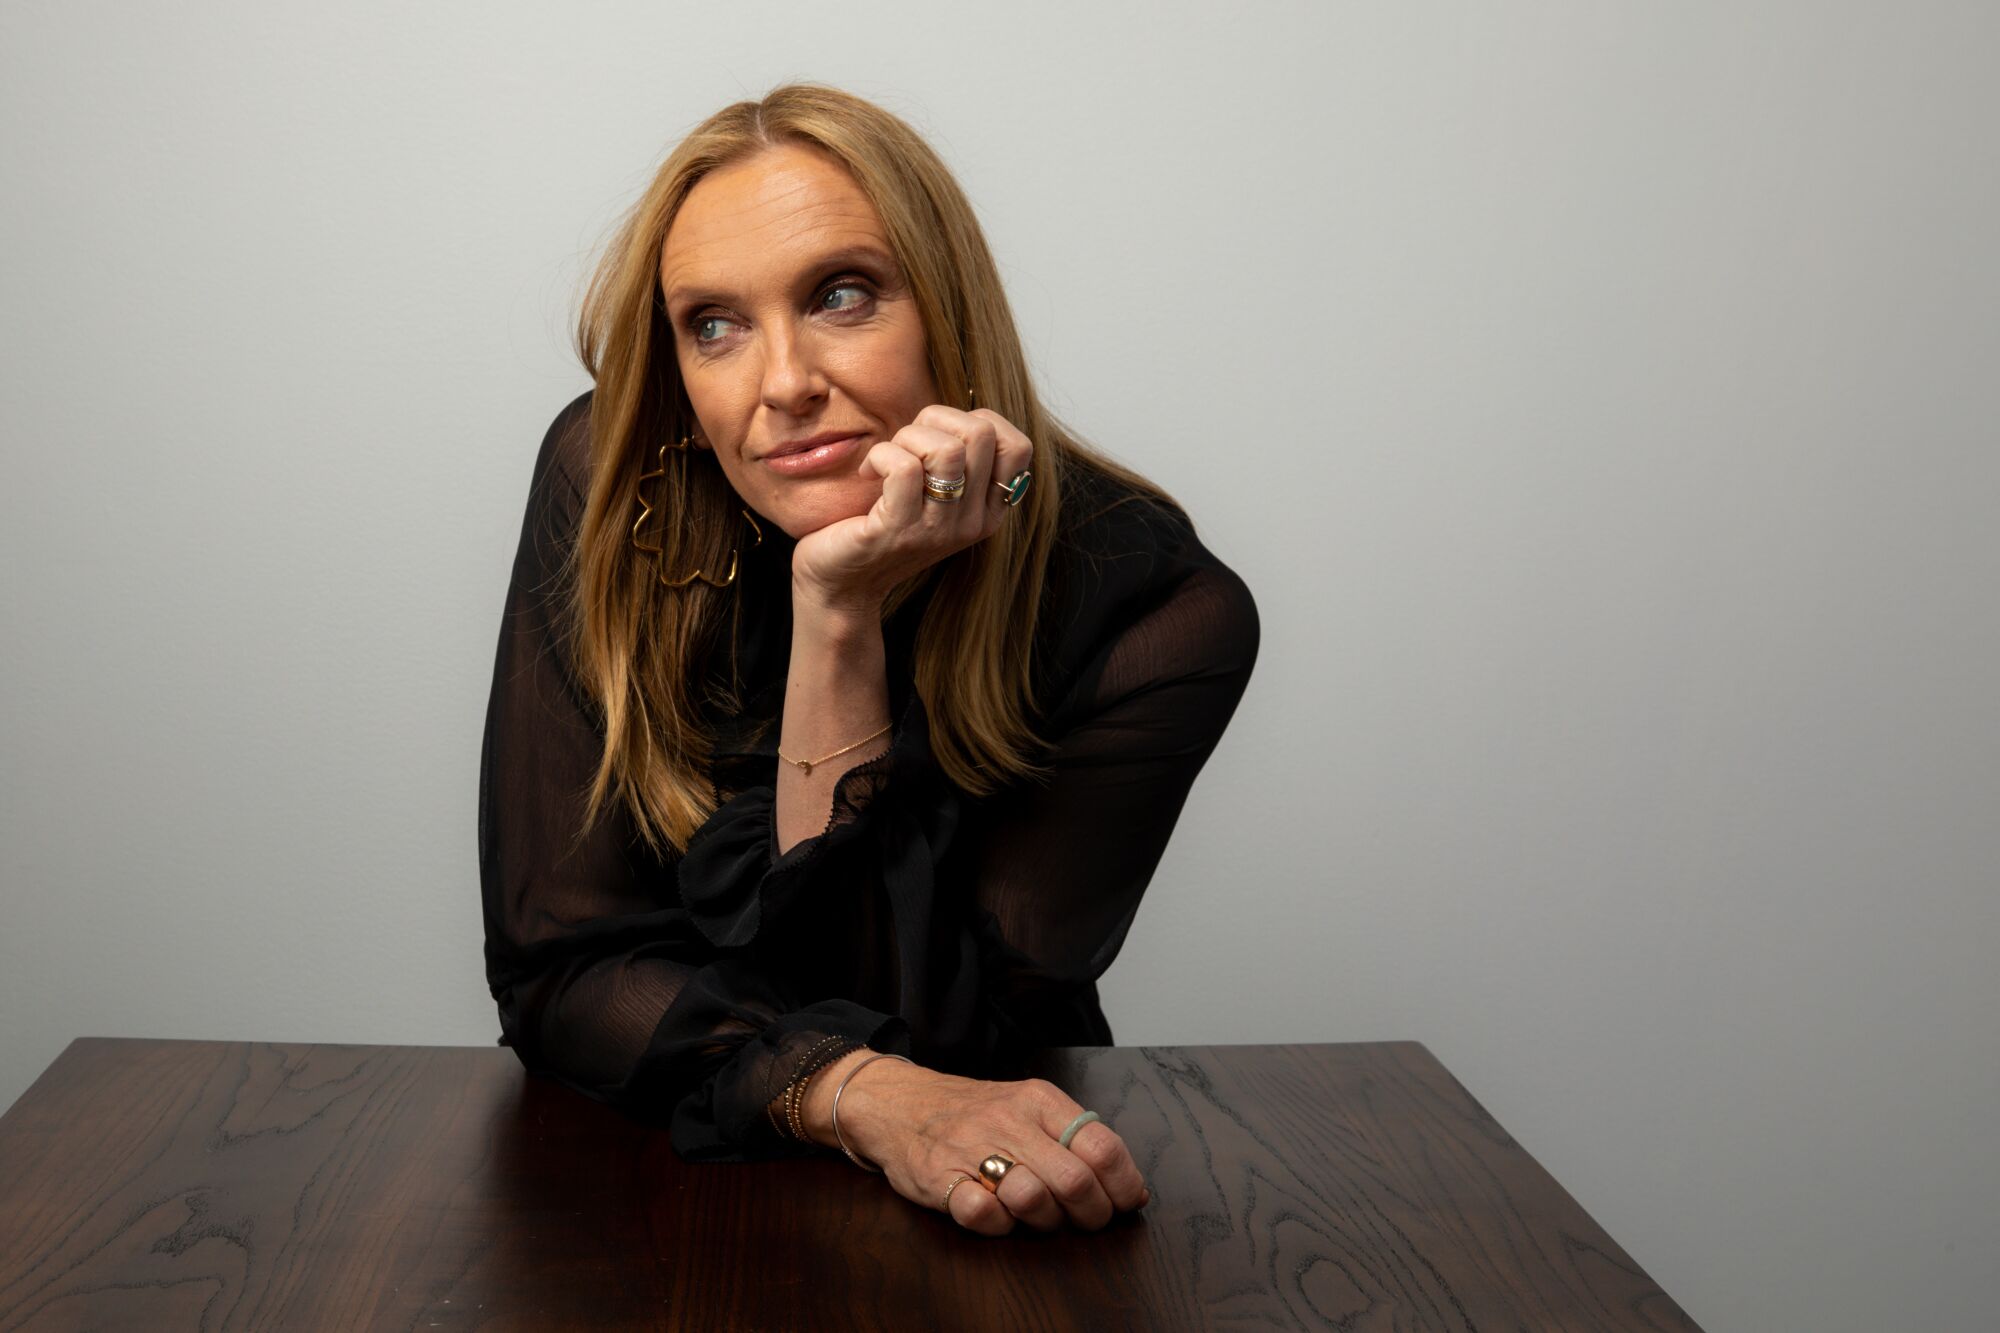 Toni Collette of “Dream Horse,” photographed in the L.A. Times Studio at the Sundance Film Festival.